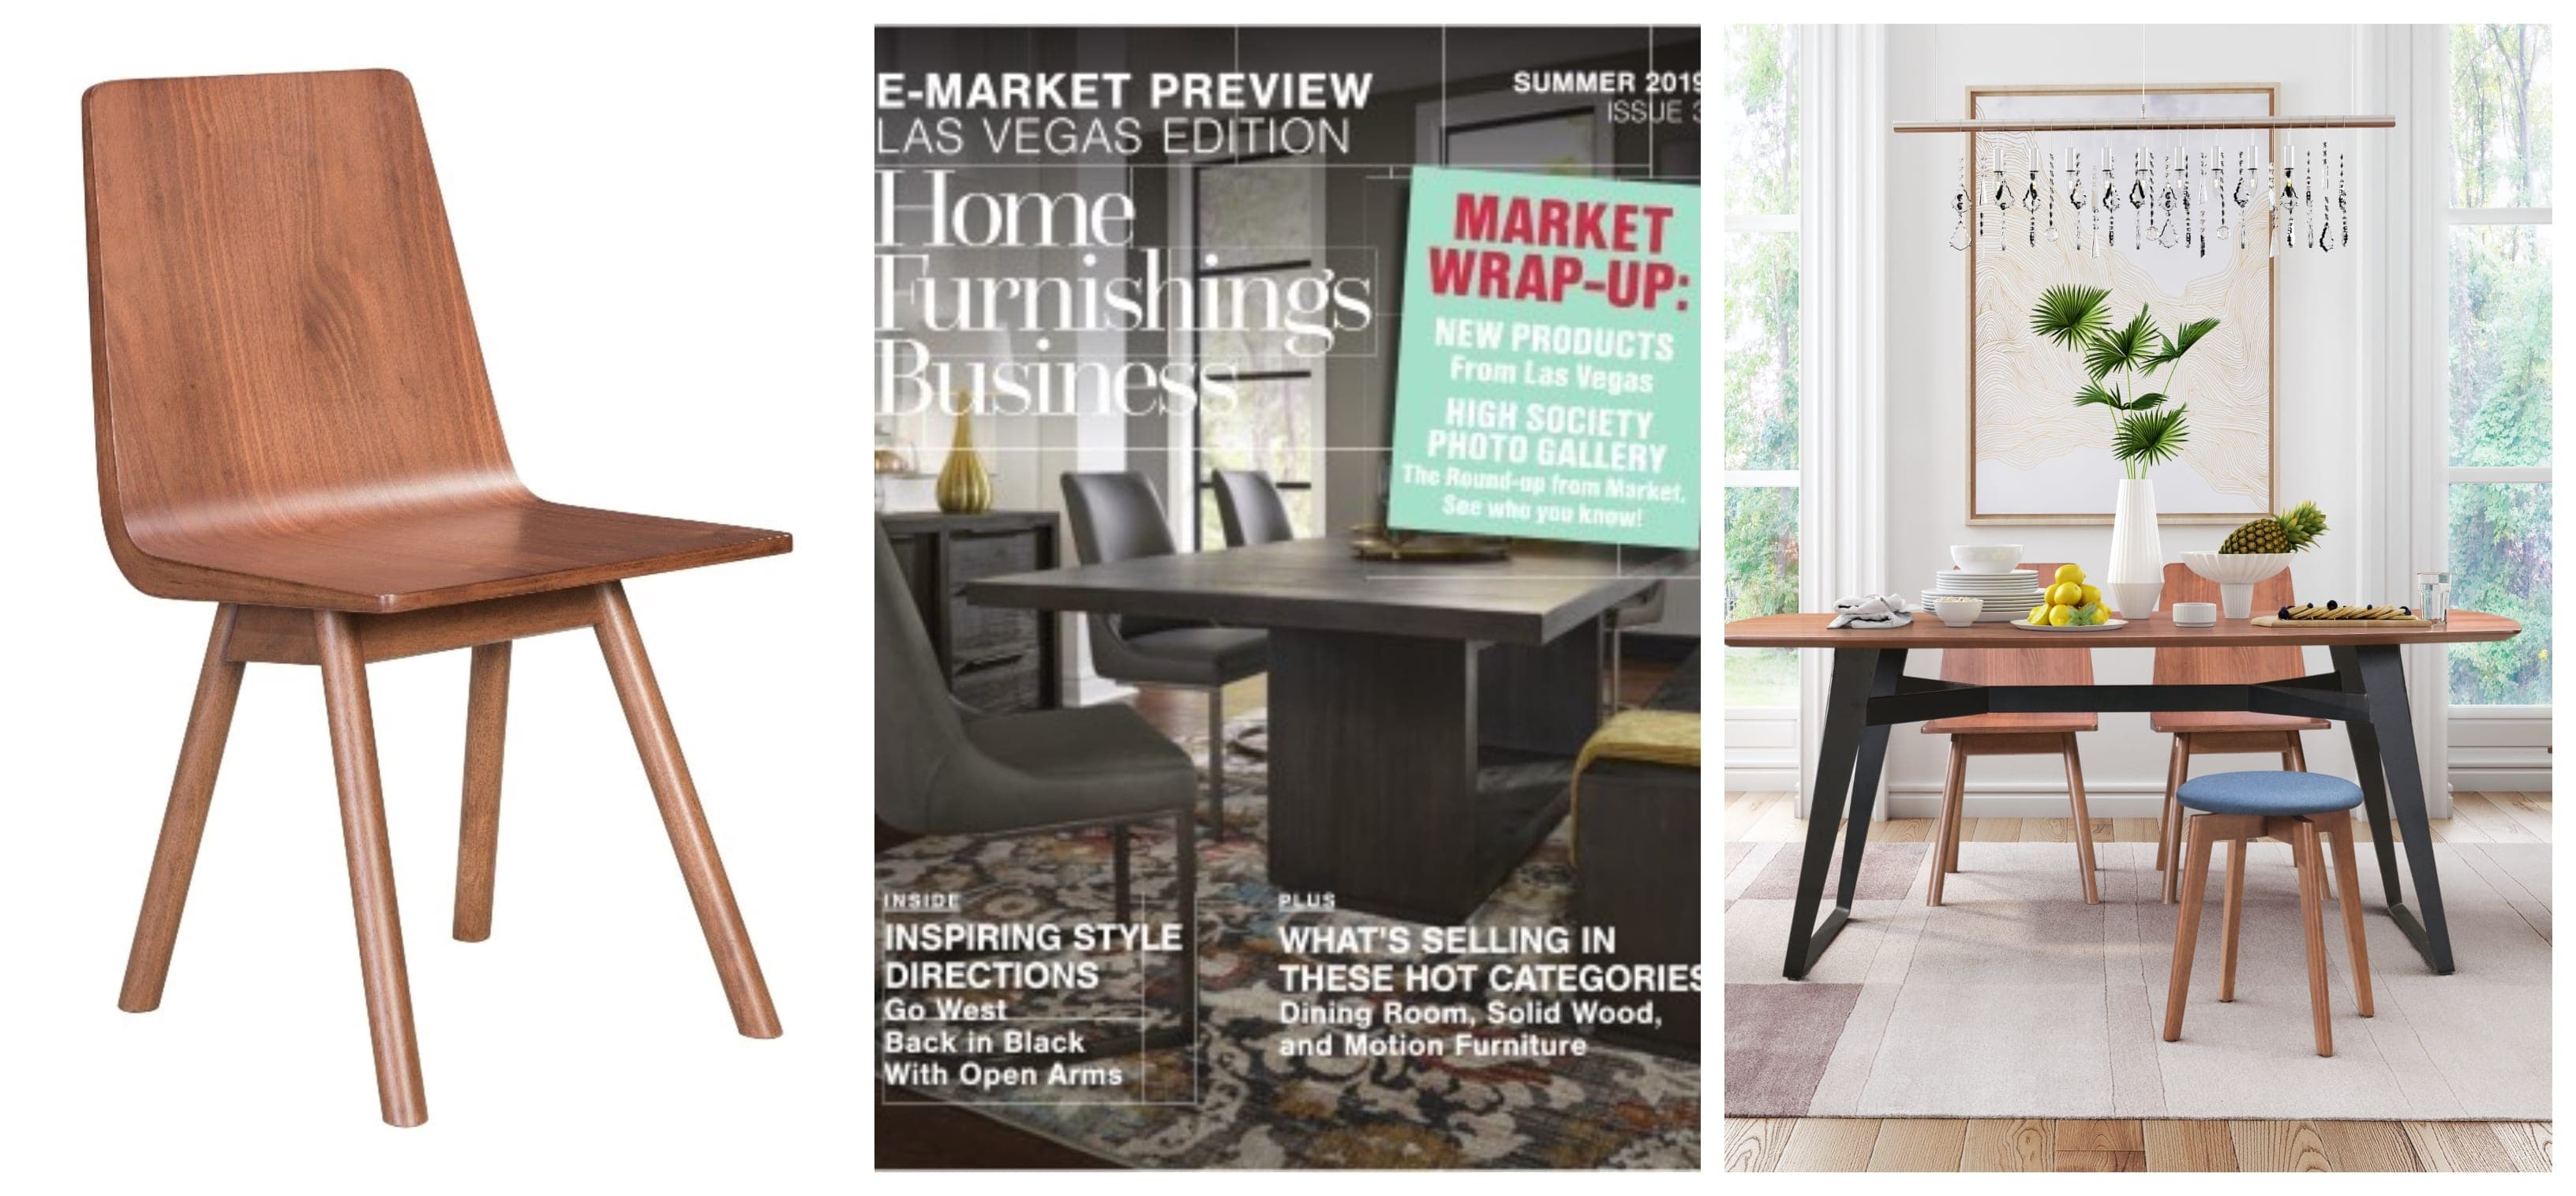 HOME FURNISHINGS BUSINESS FEATURES ZUO’S AUDREY DINING CHAIR IN SUMMER 2019 ISSUE